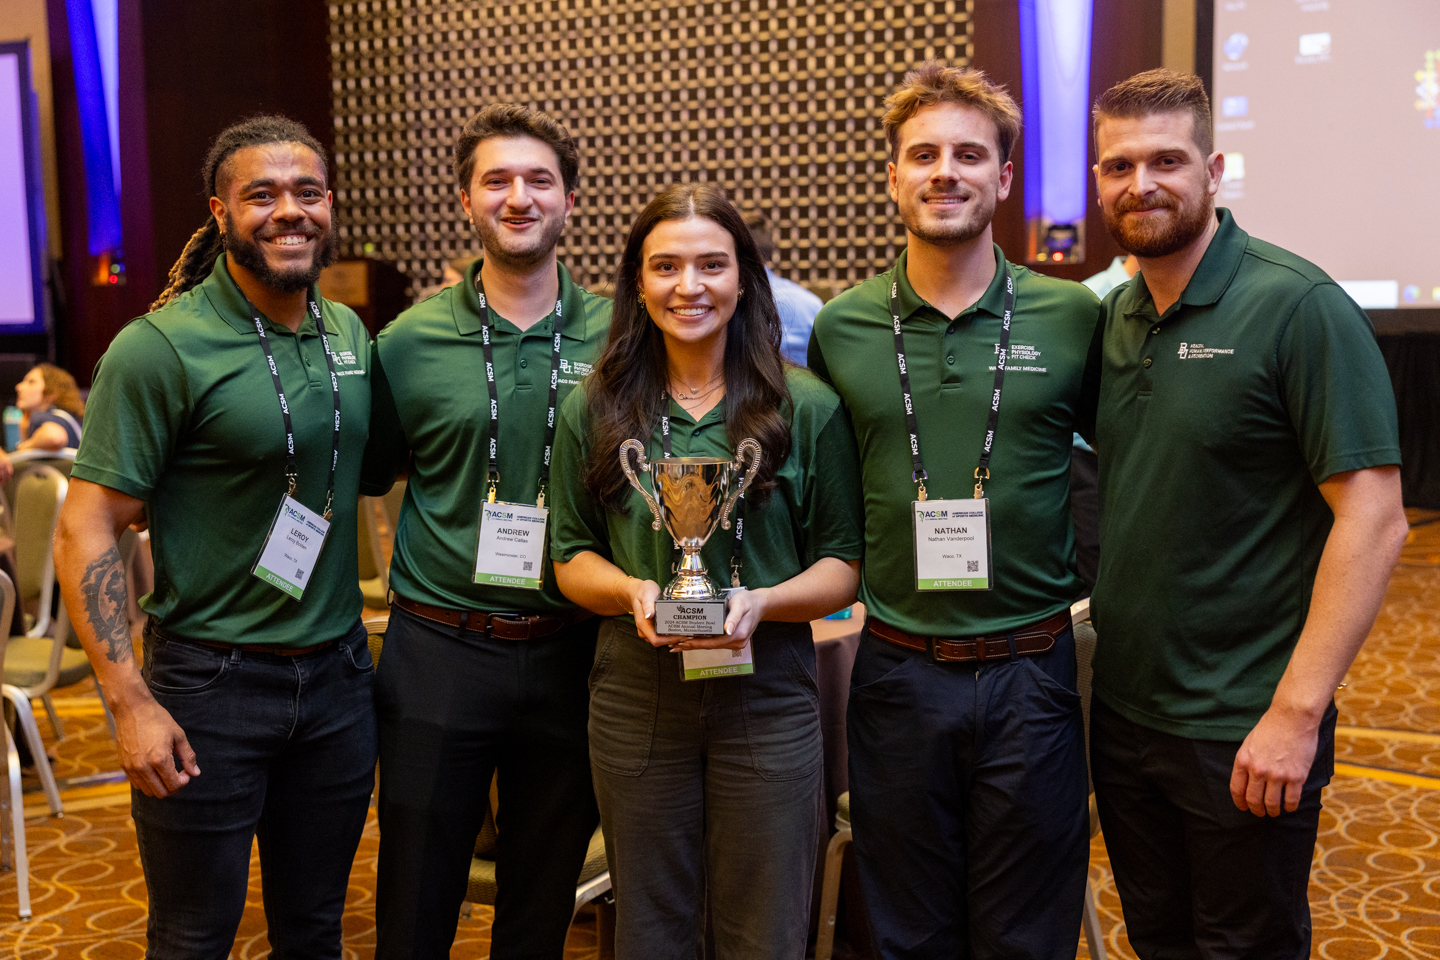 ACSM 2024 student bowl winners, team from Texas. four men and one woman all wearing jeans and dark green polos. the woman in the middle is holding a trophy